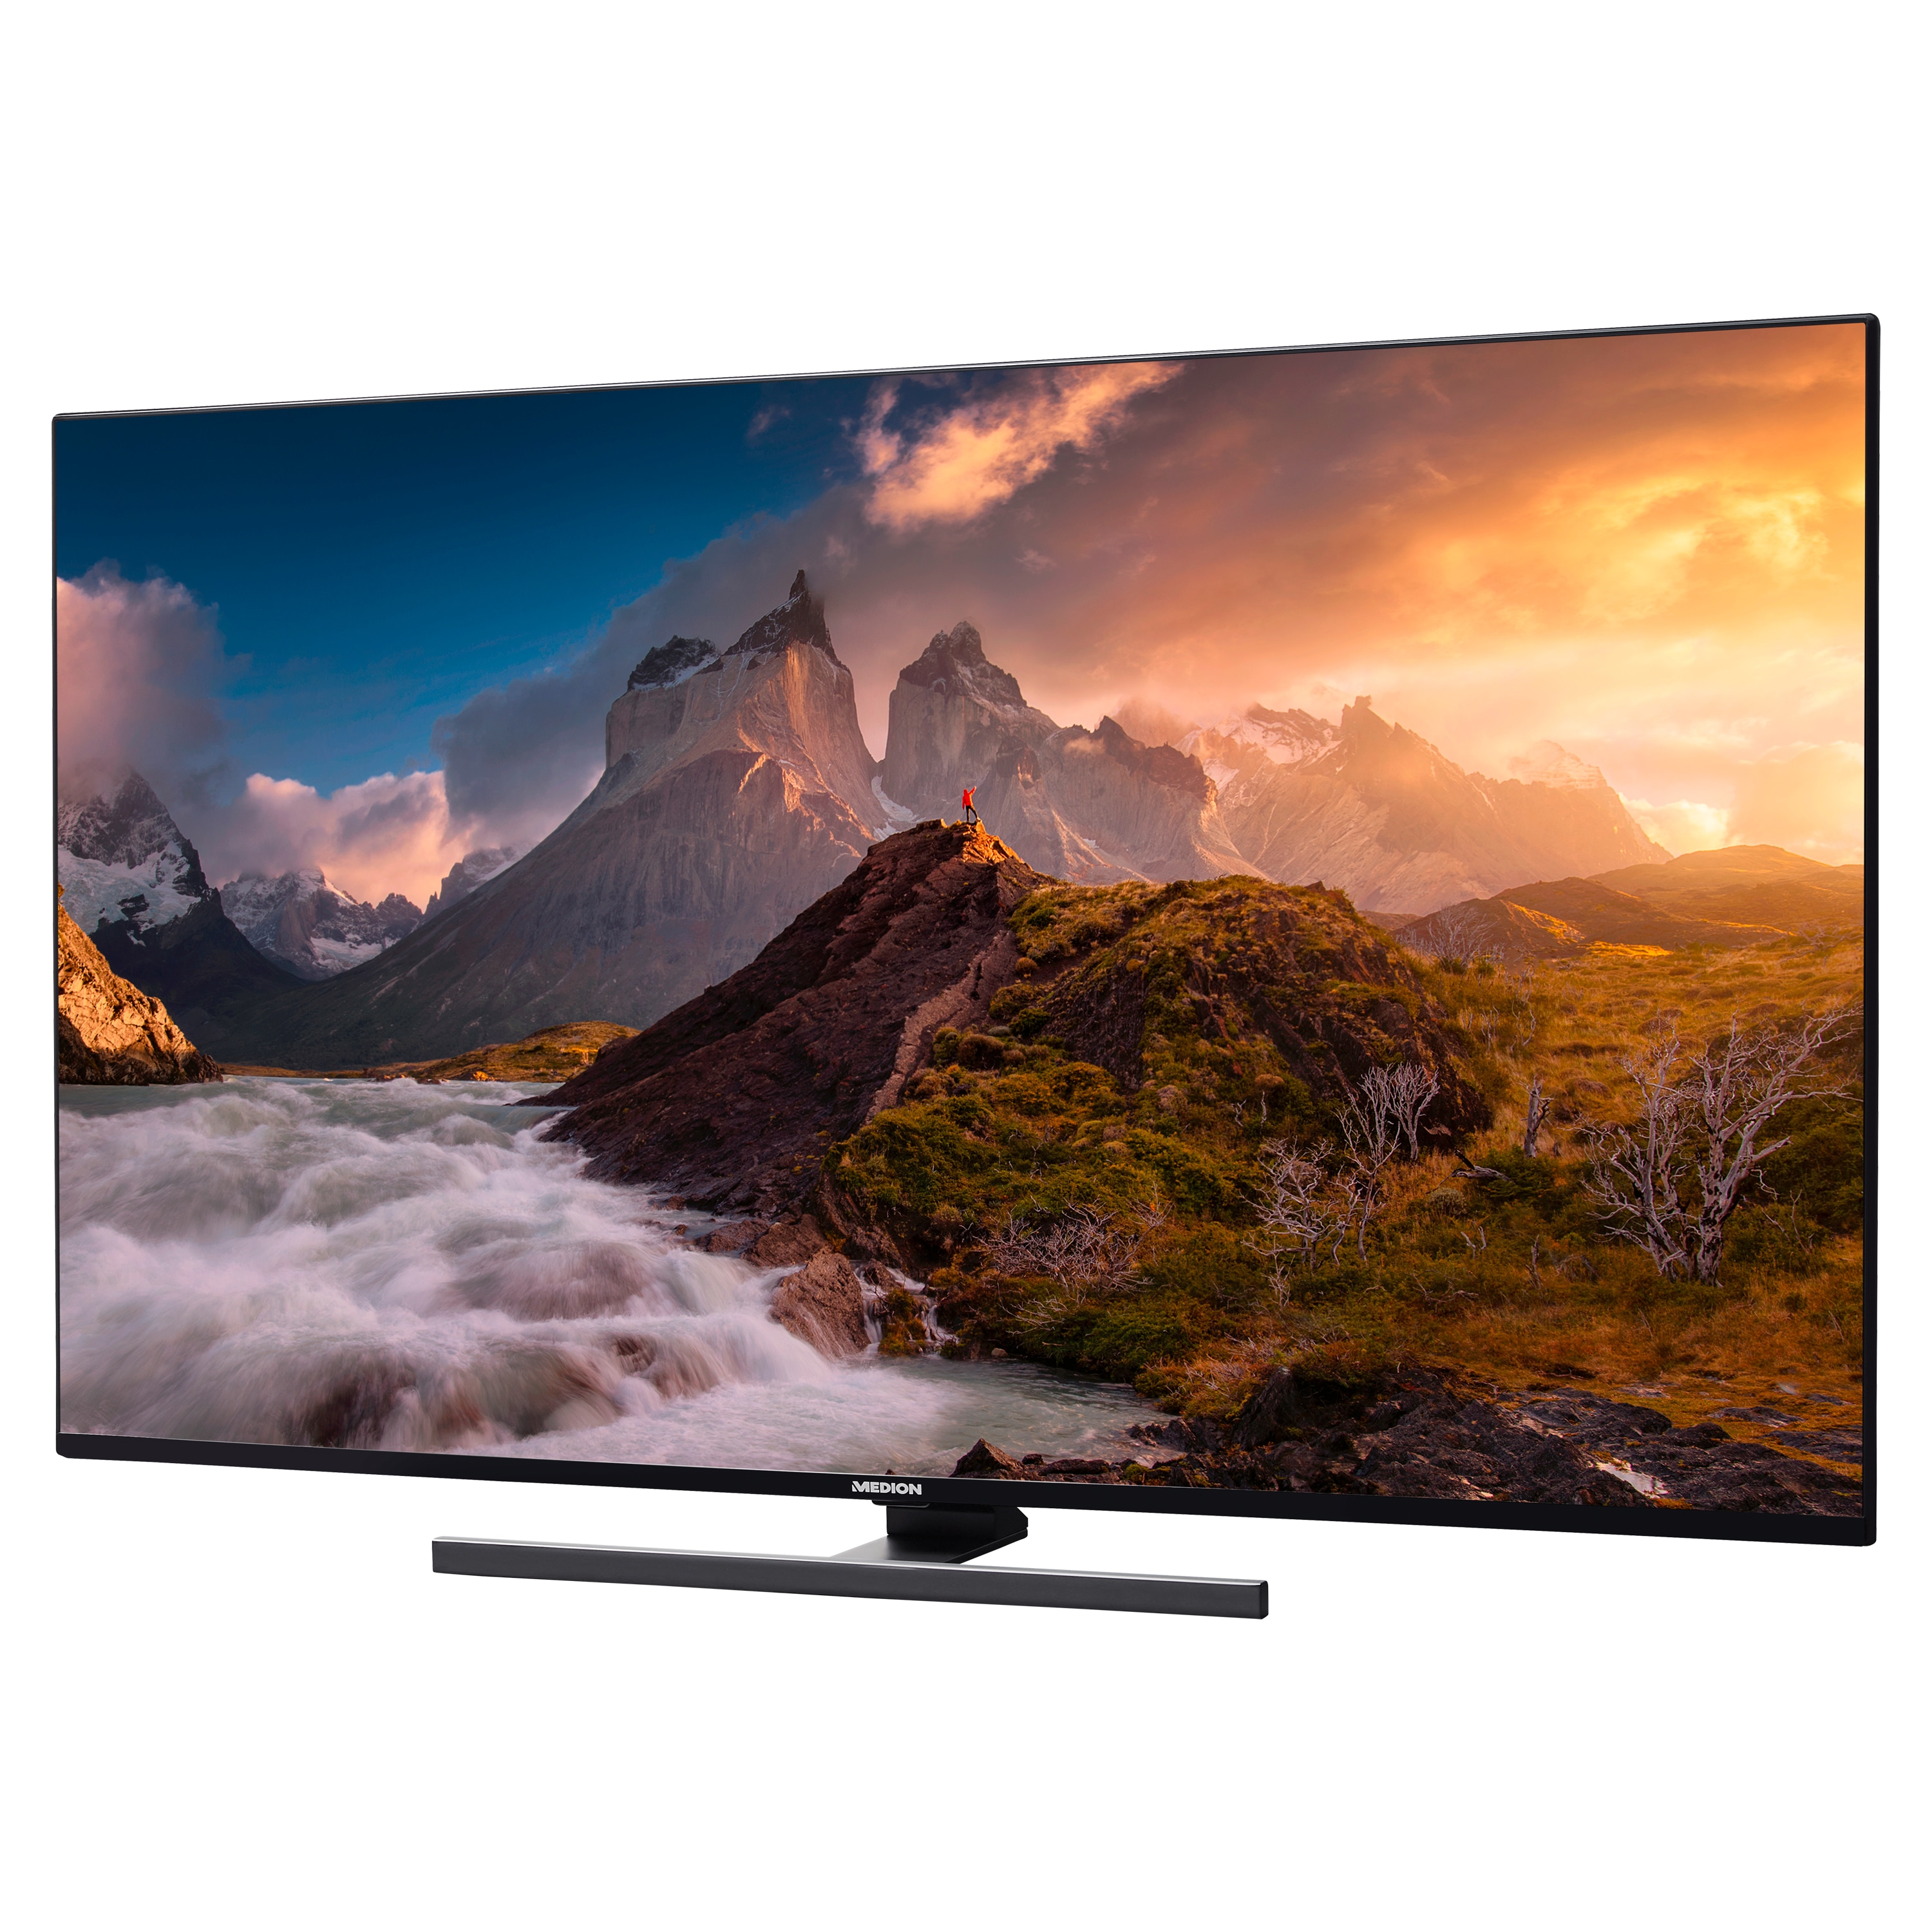 MEDION® LIFE® X14377 (MD 30075) QLED Android TV, 108 cm (43'') Ultra HD Smart-TV, HDR, Dolby Vision®, Micro Dimming, MEMC, PVR ready, Netflix, Amazon Prime Video, Bluetooth®, DTS Virtual X, DTS X und Dolby Atmos Unterstützung, HD Triple Tuner, CI+